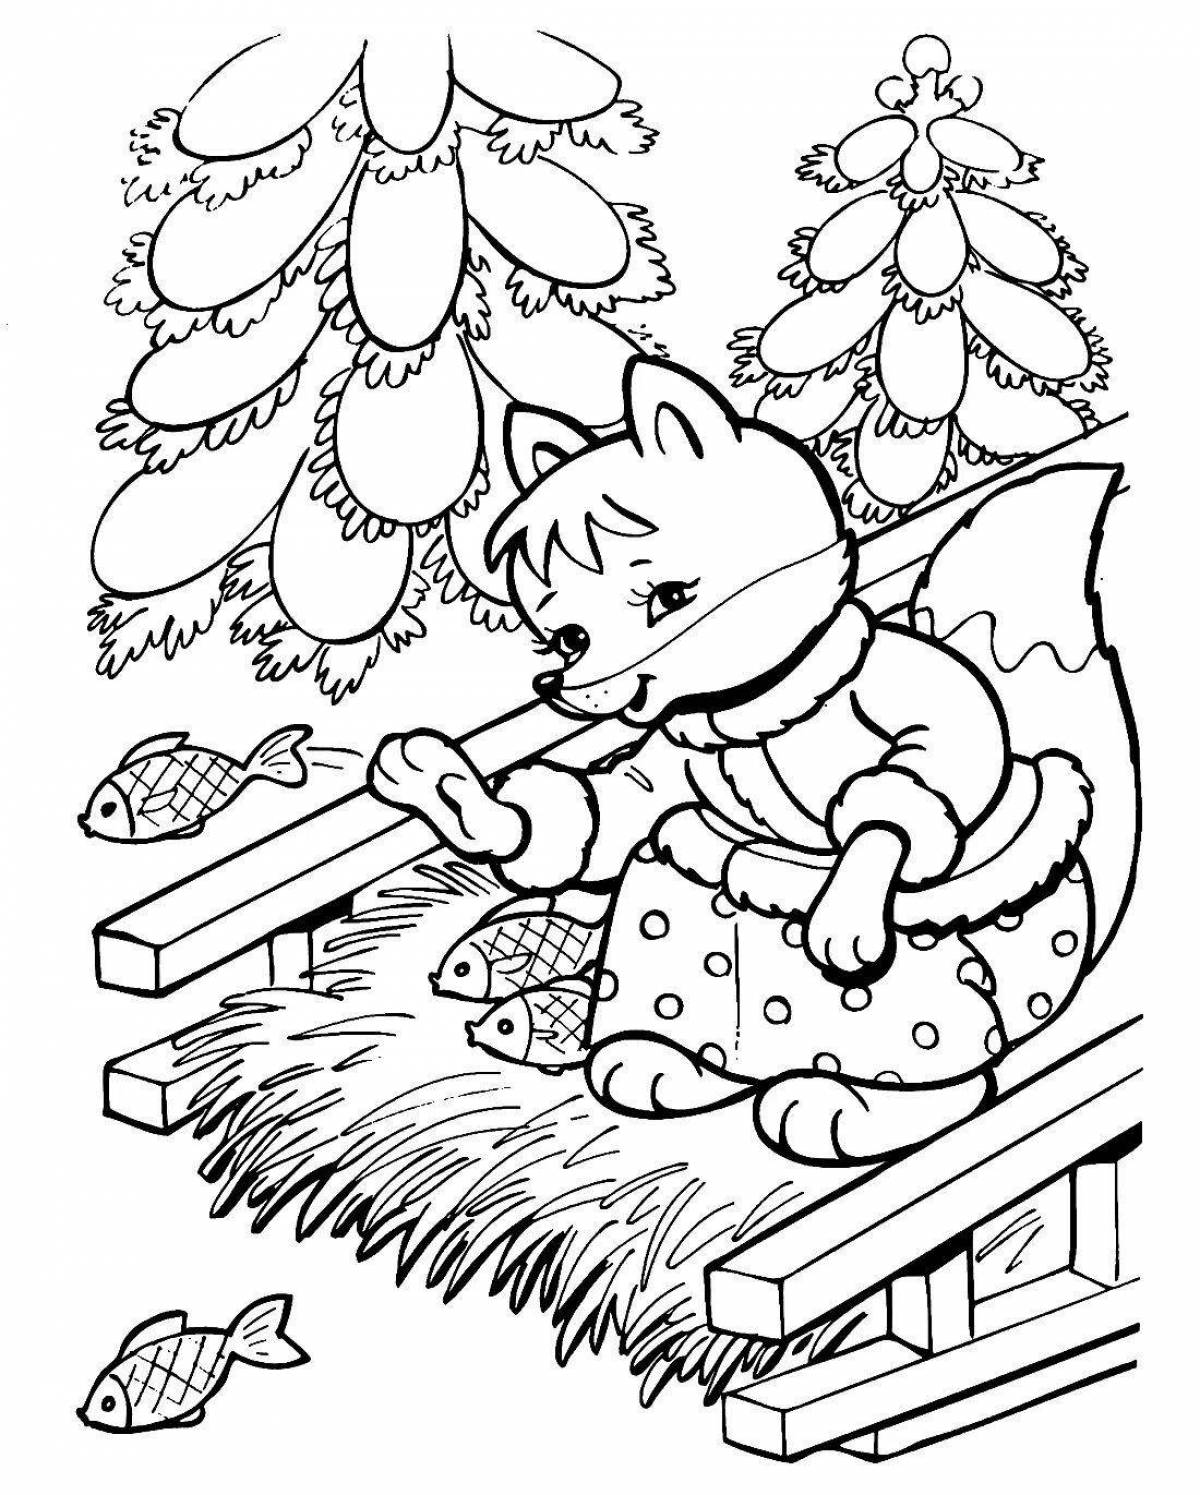 Joyful coloring fairytale fox with a rolling pin